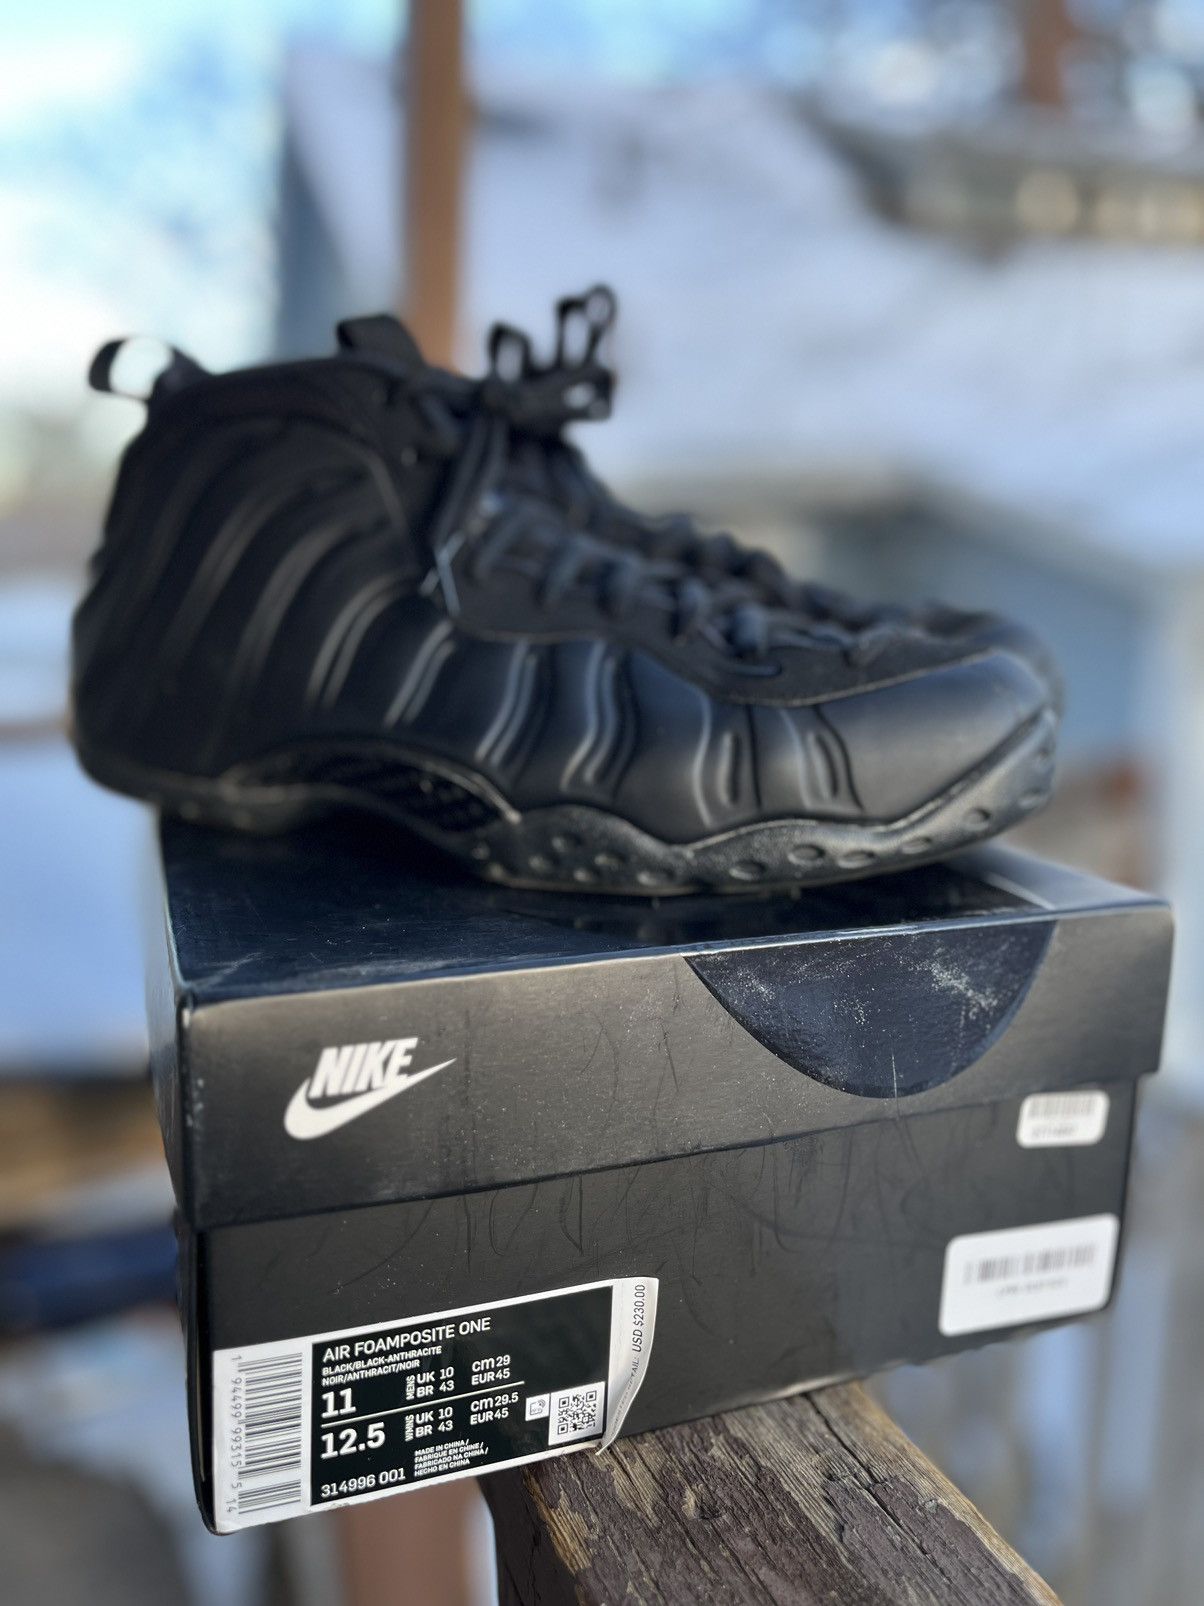 Nike Air Foamposite One Anthracite (2020) Men's - 314996-001 - US